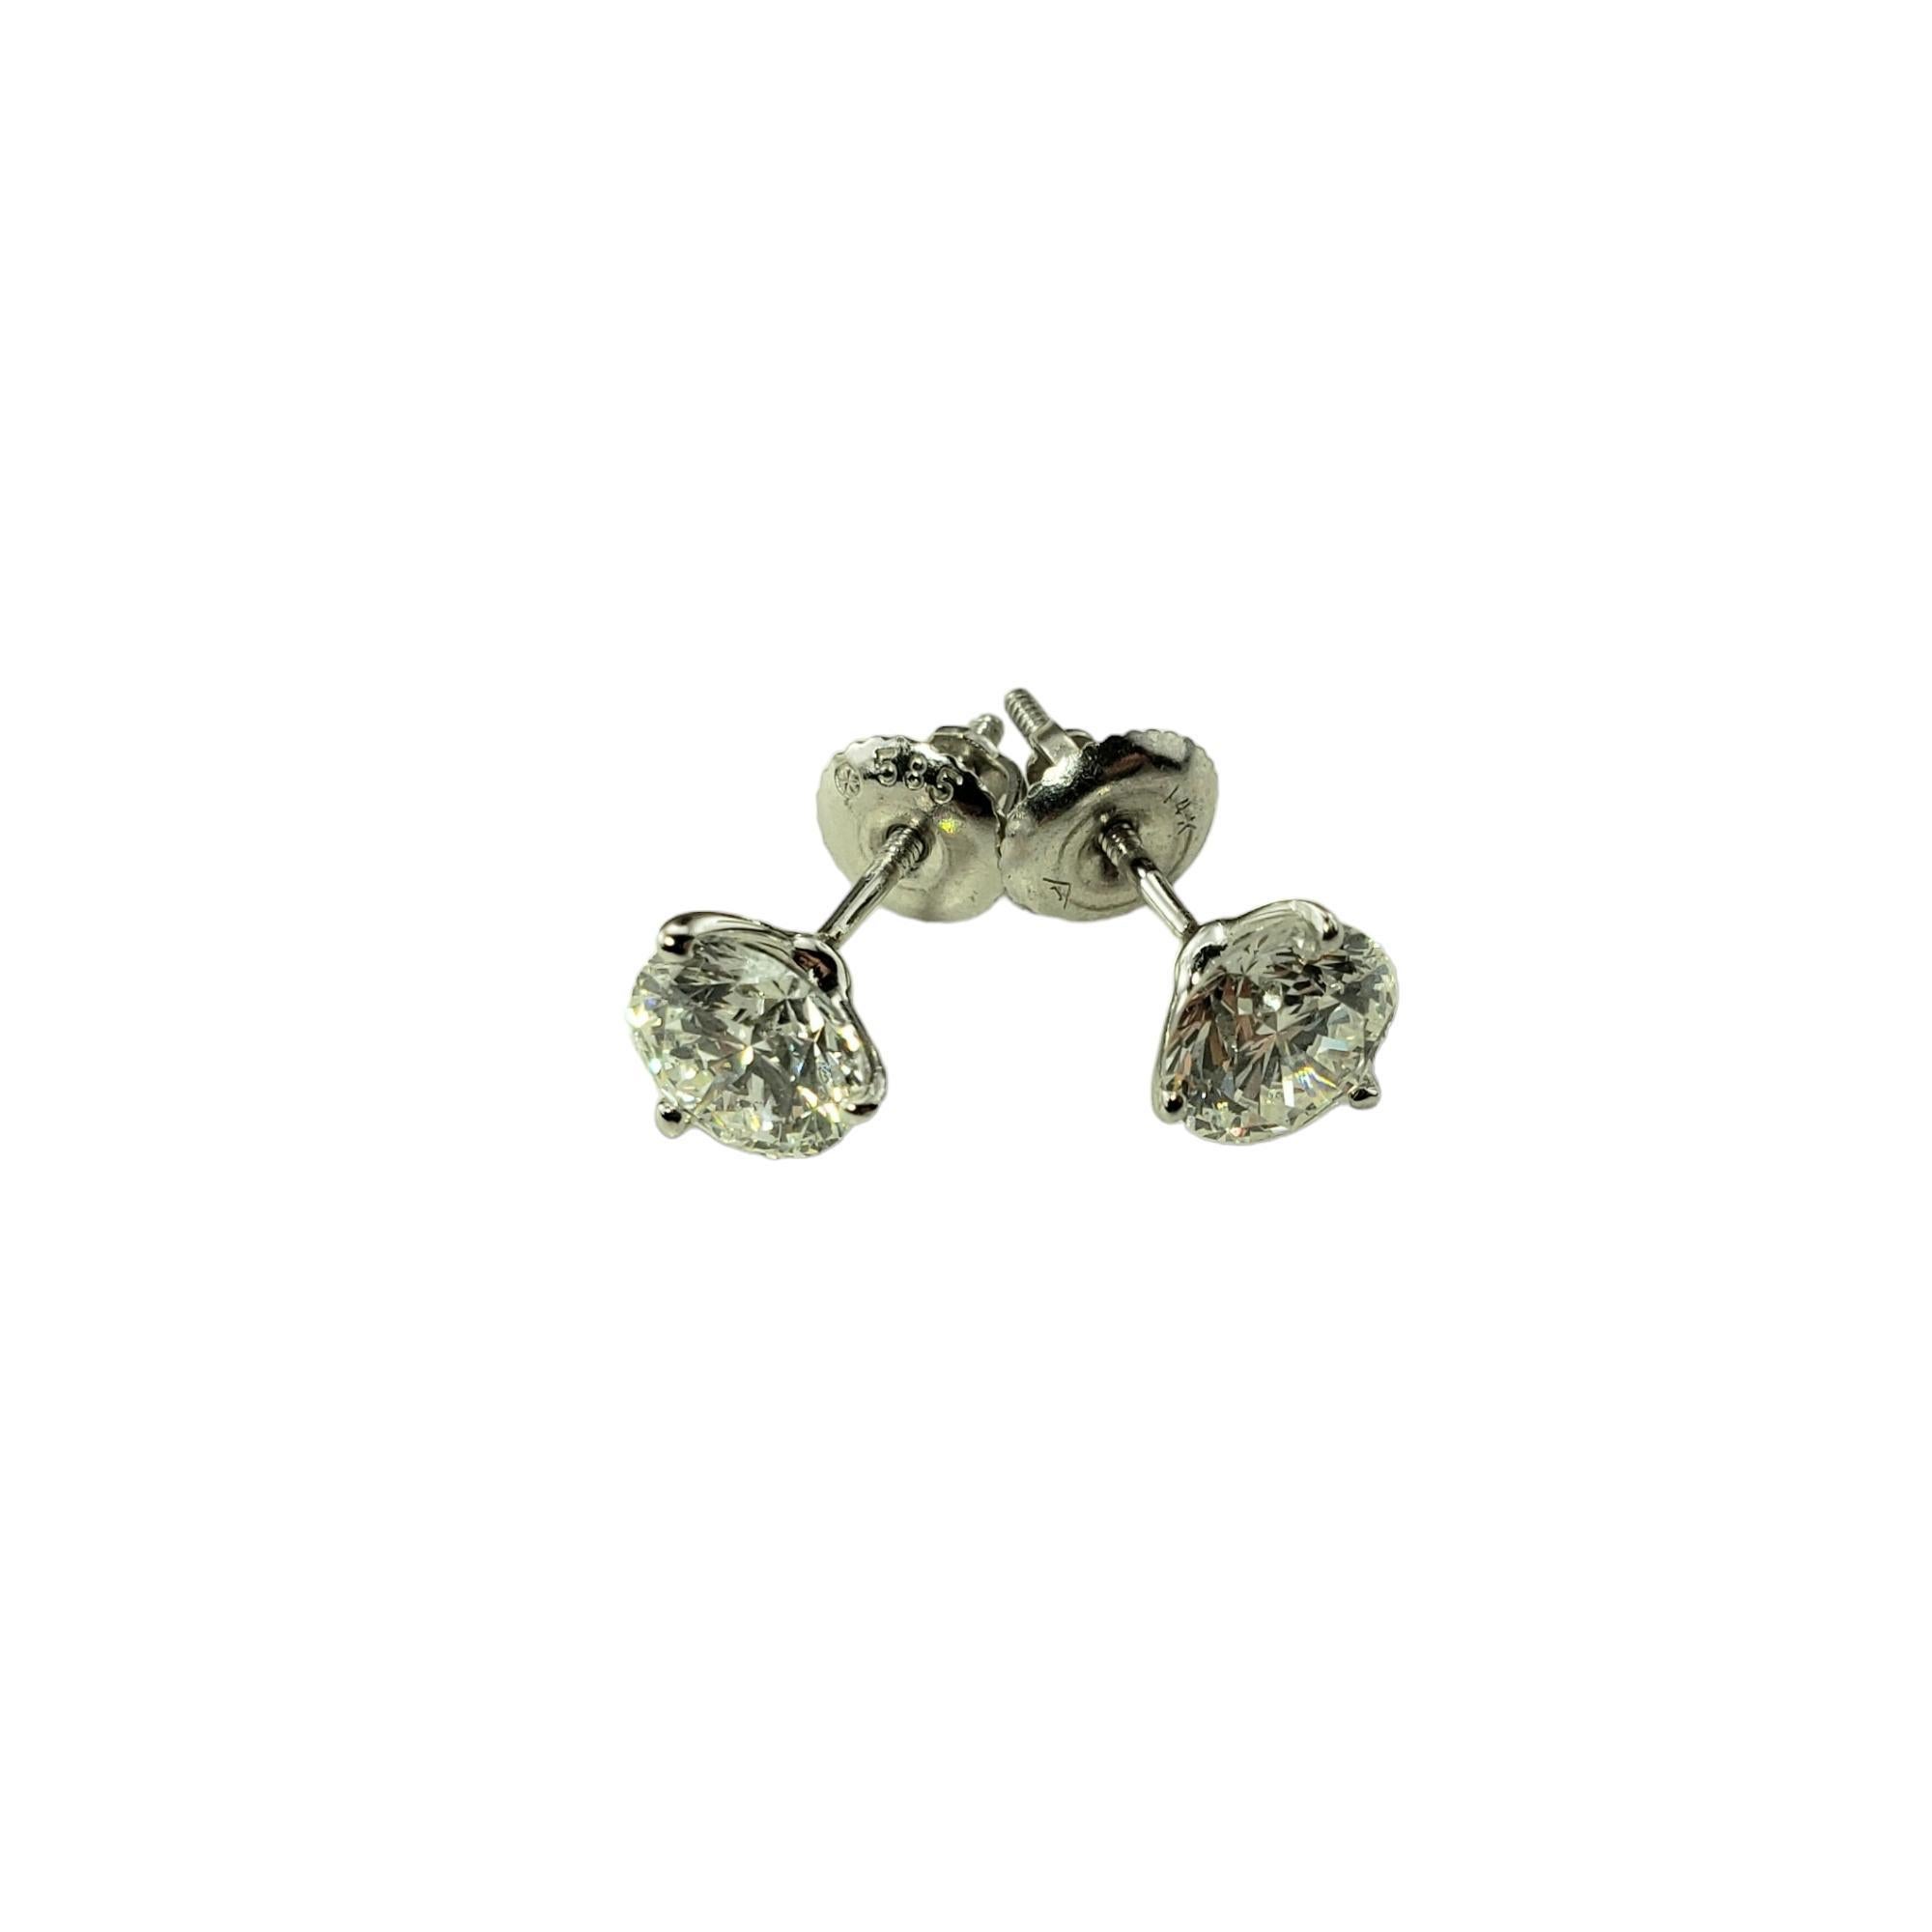 Vintage 14 Karat White Gold Diamond Stud Earrings JAGi Certified-

These sparkling stud earrings each feature one round brilliant cut diamond set in classic 14K white gold.  Screw back closures. 

Total diamond weight:  1.76 ct.

Diamond clarity: 